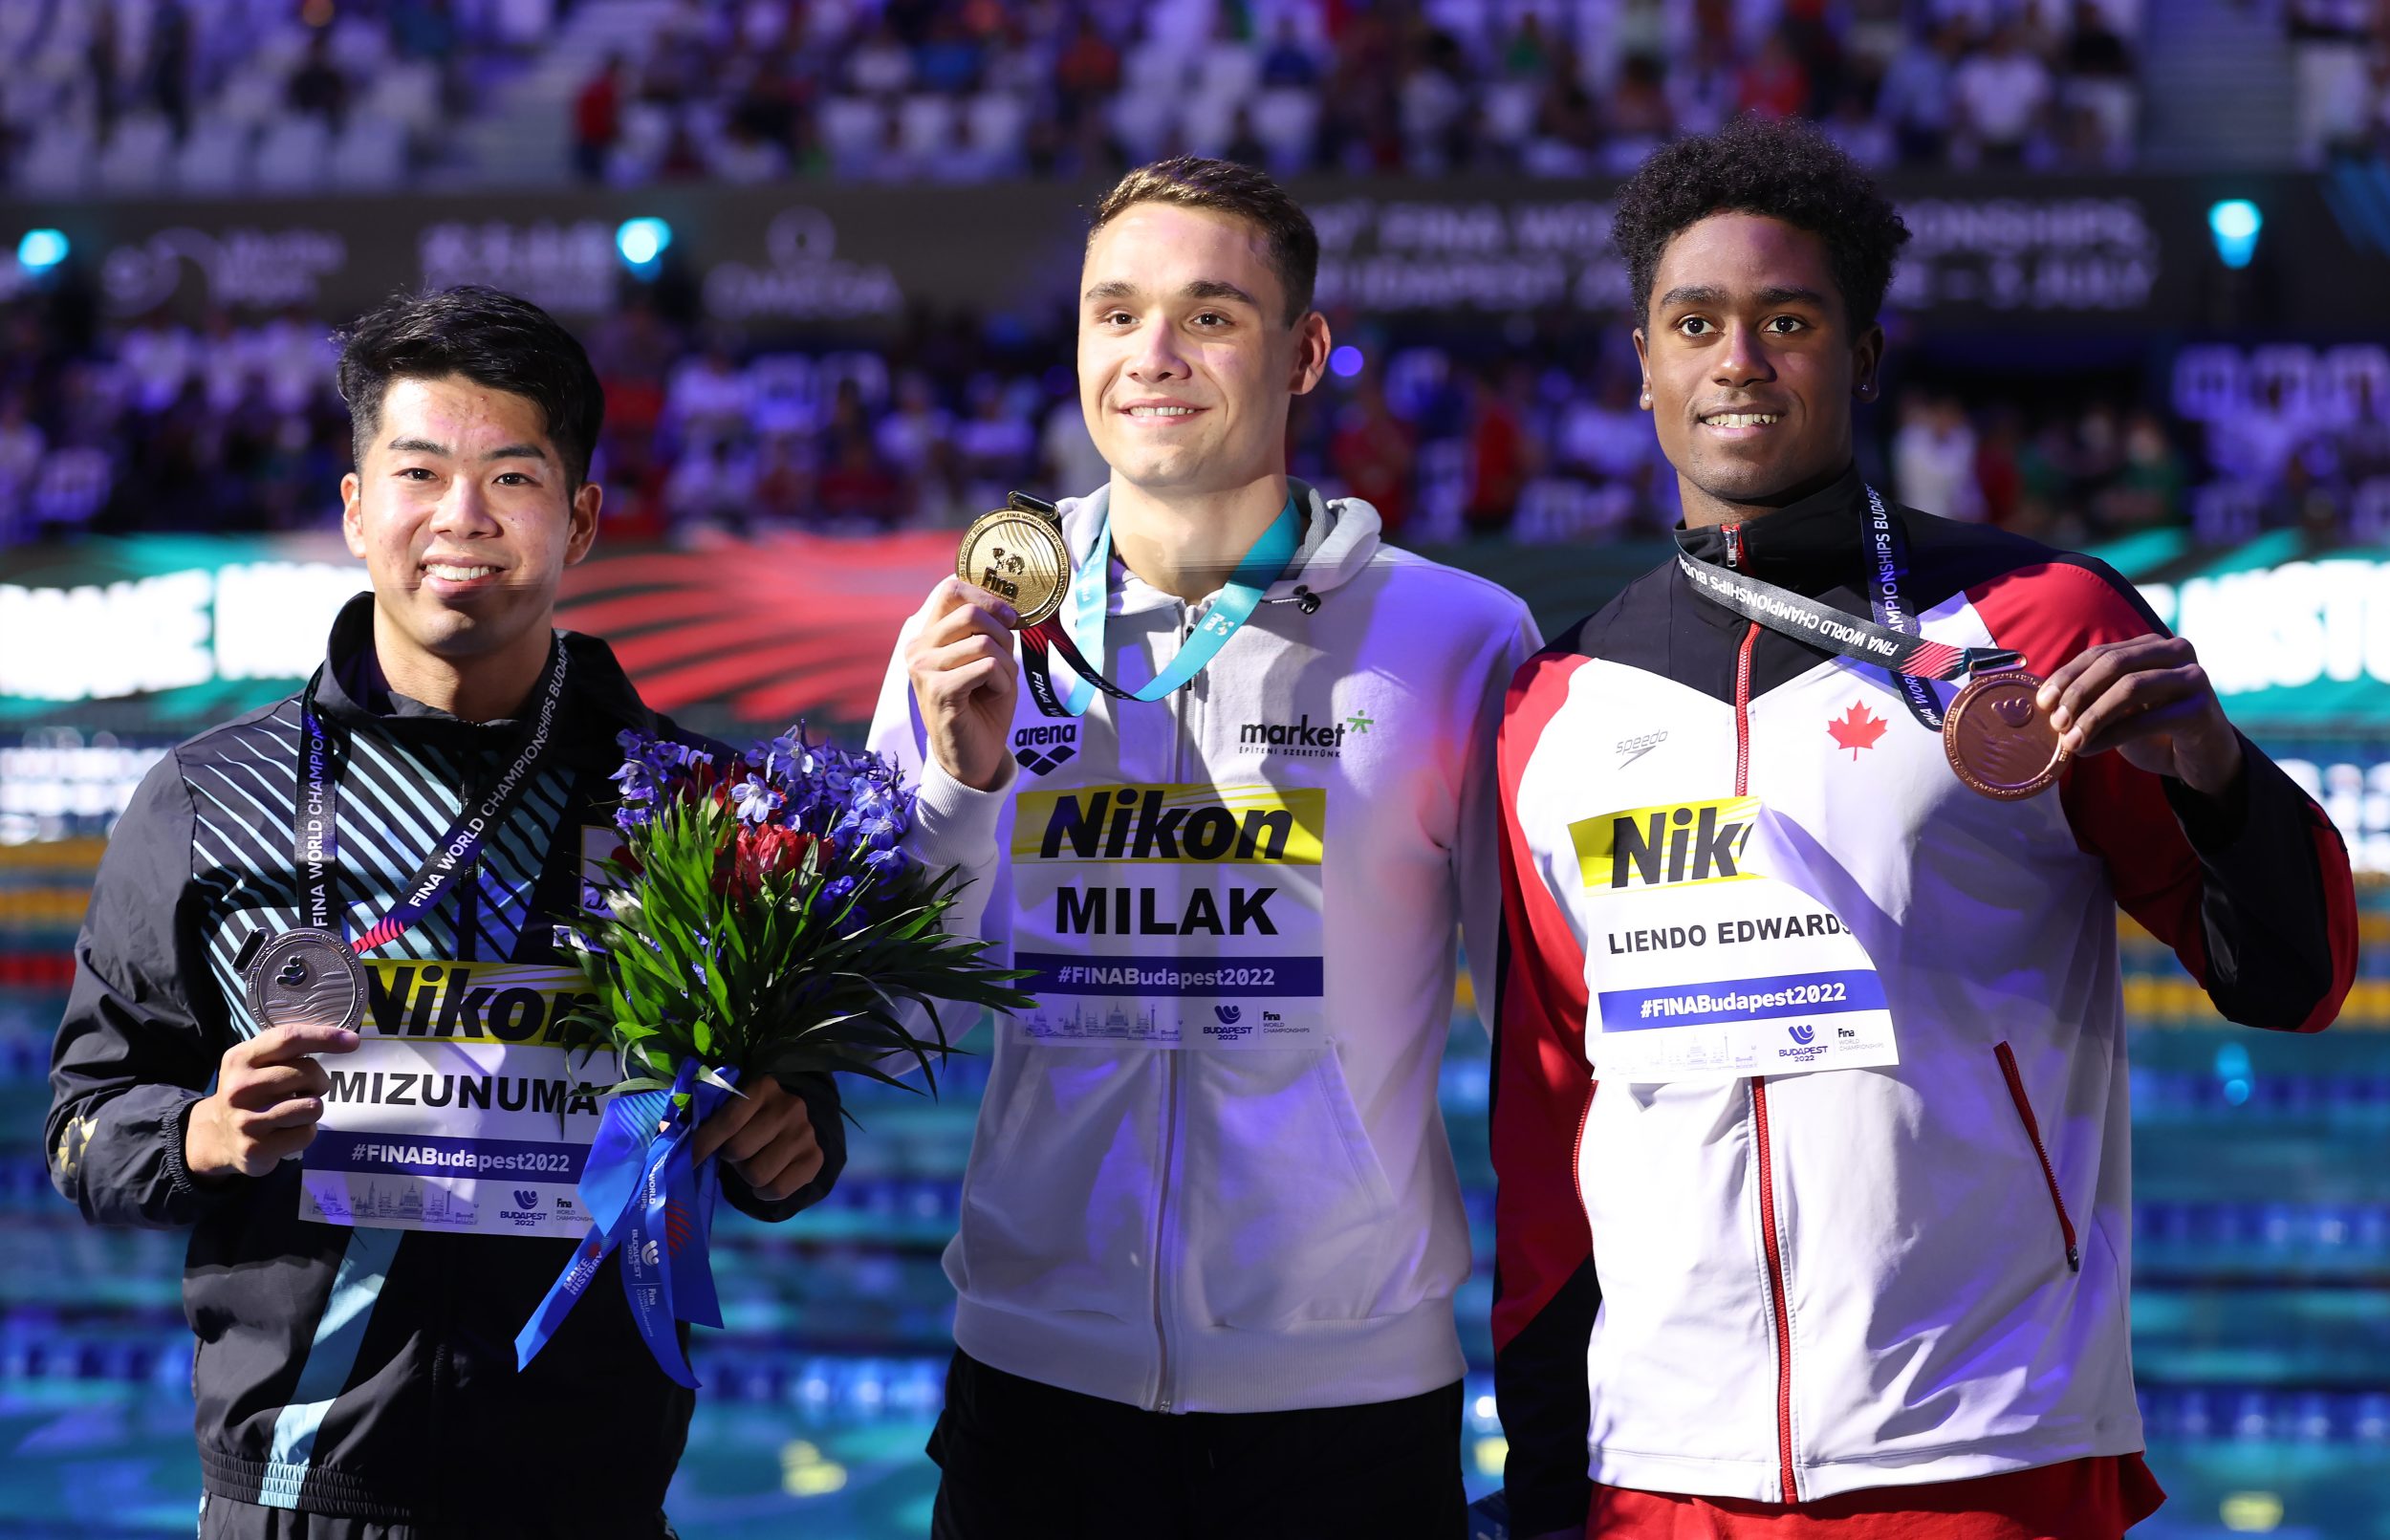 Joshua Liendo holds up his bronze medal while standing alongside his fellow medallists